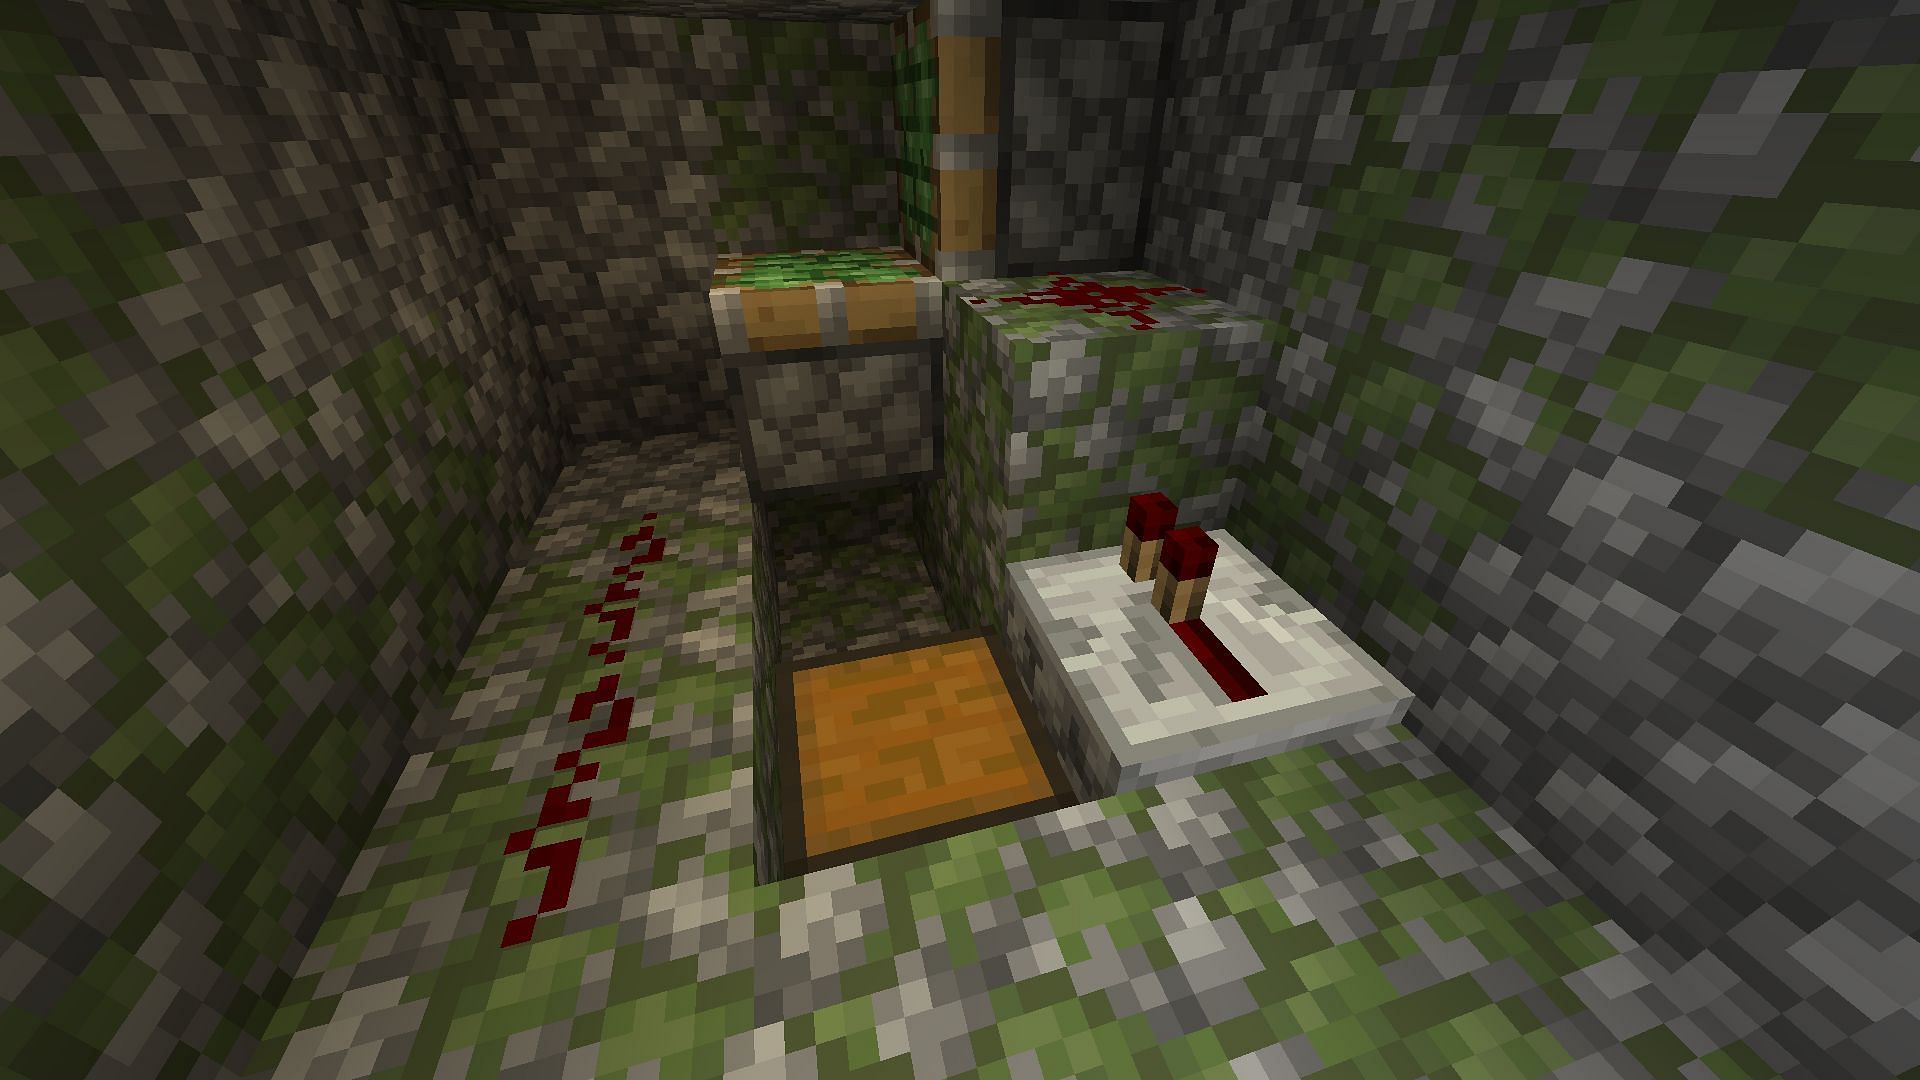 Redstone repeater used in jungle temple structure for a puzzle (Image via Minecraft 1.19 update)